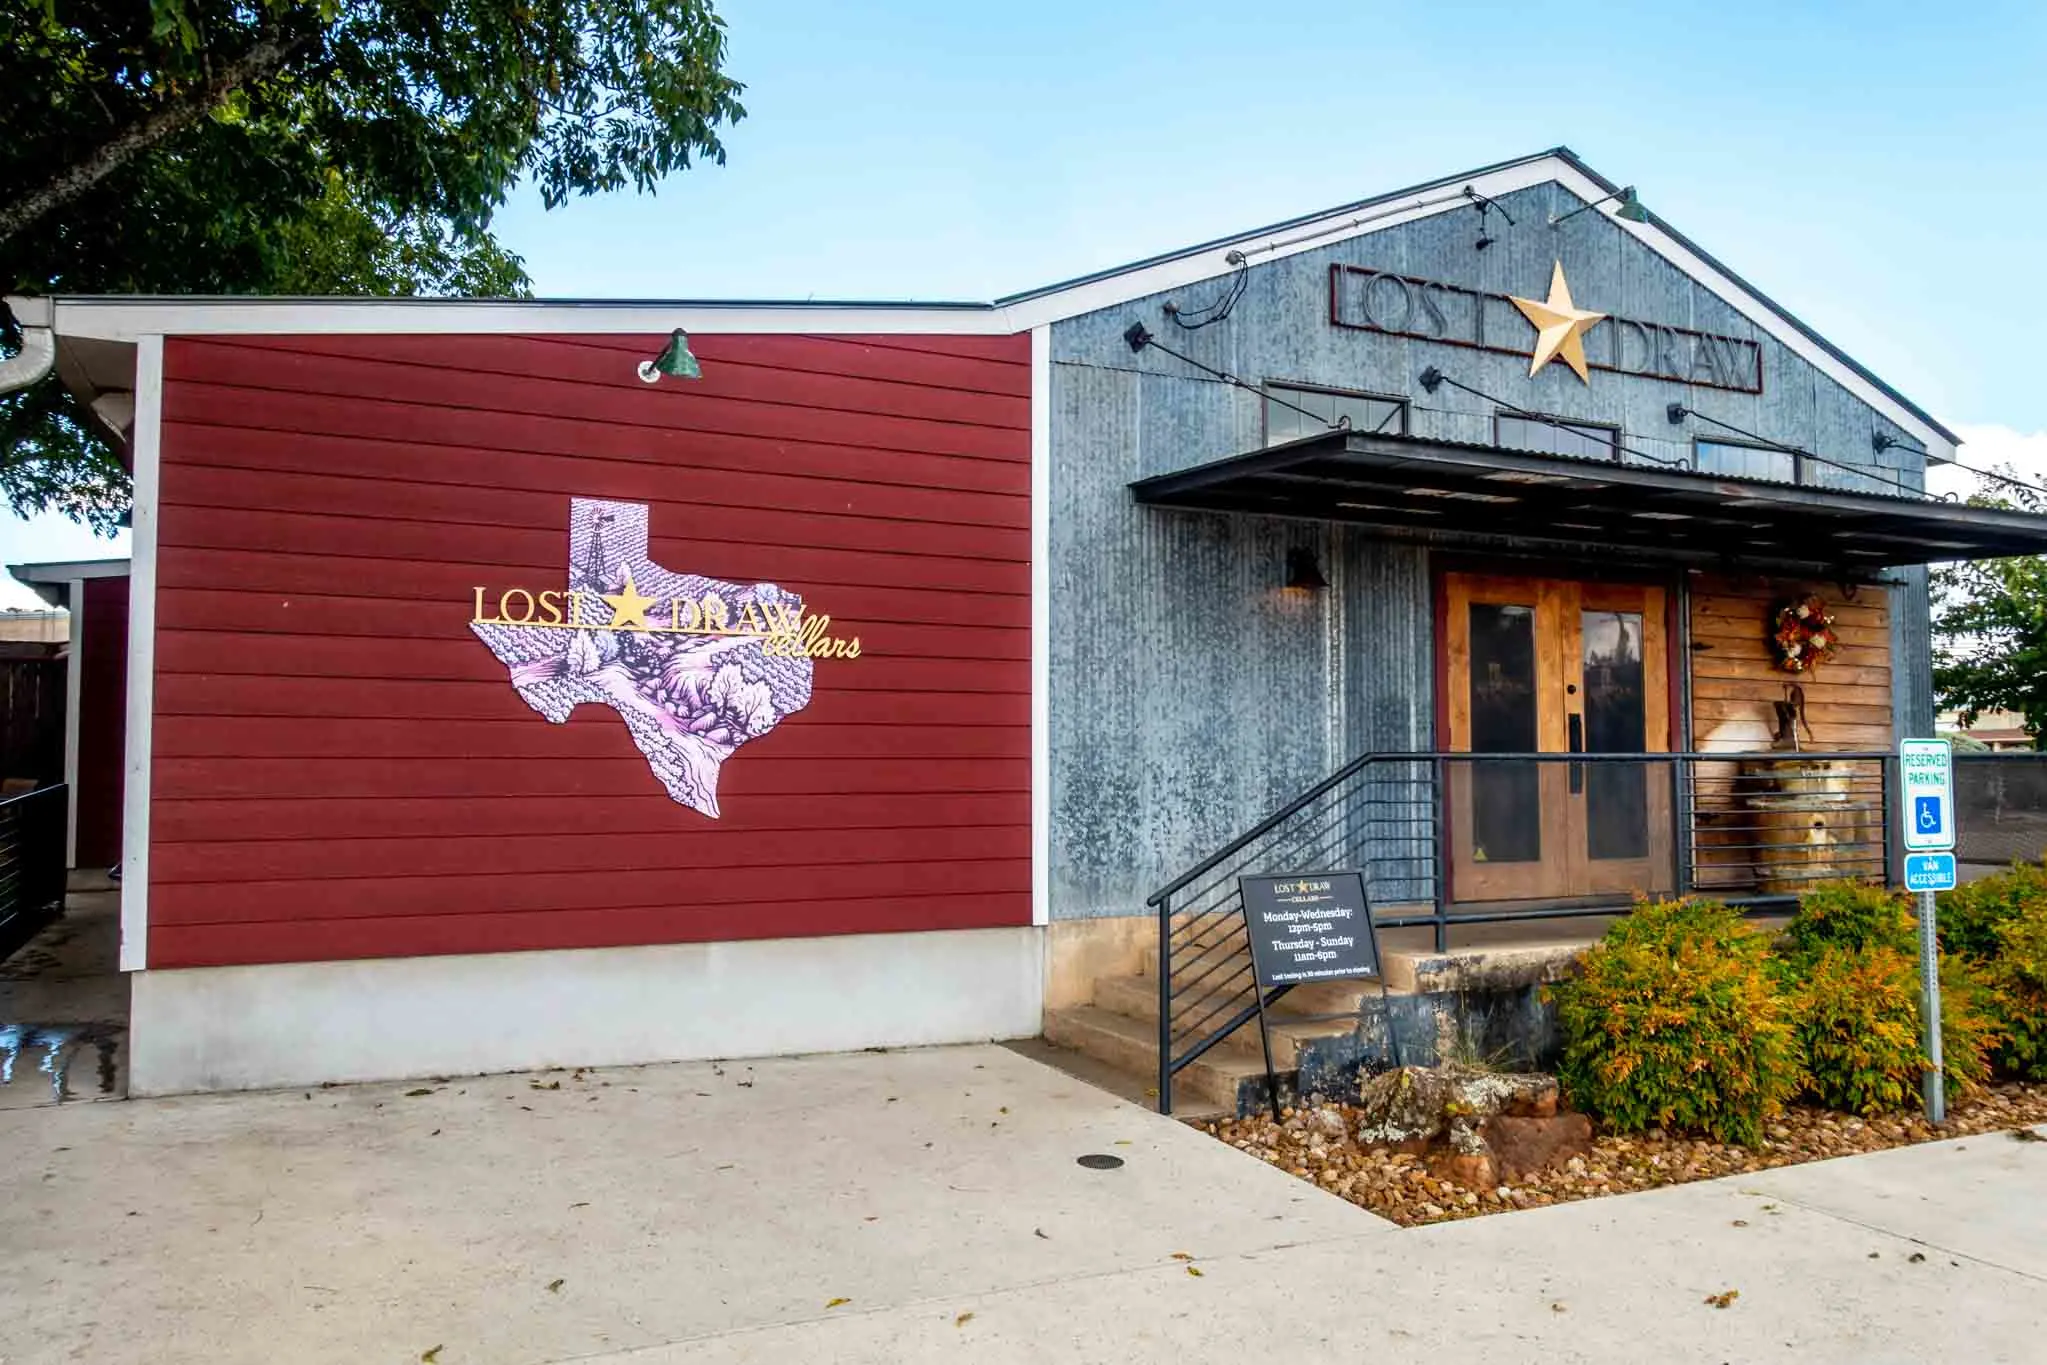 Exterior of Lost Draw tasting room with Texas-shaped logo and signs